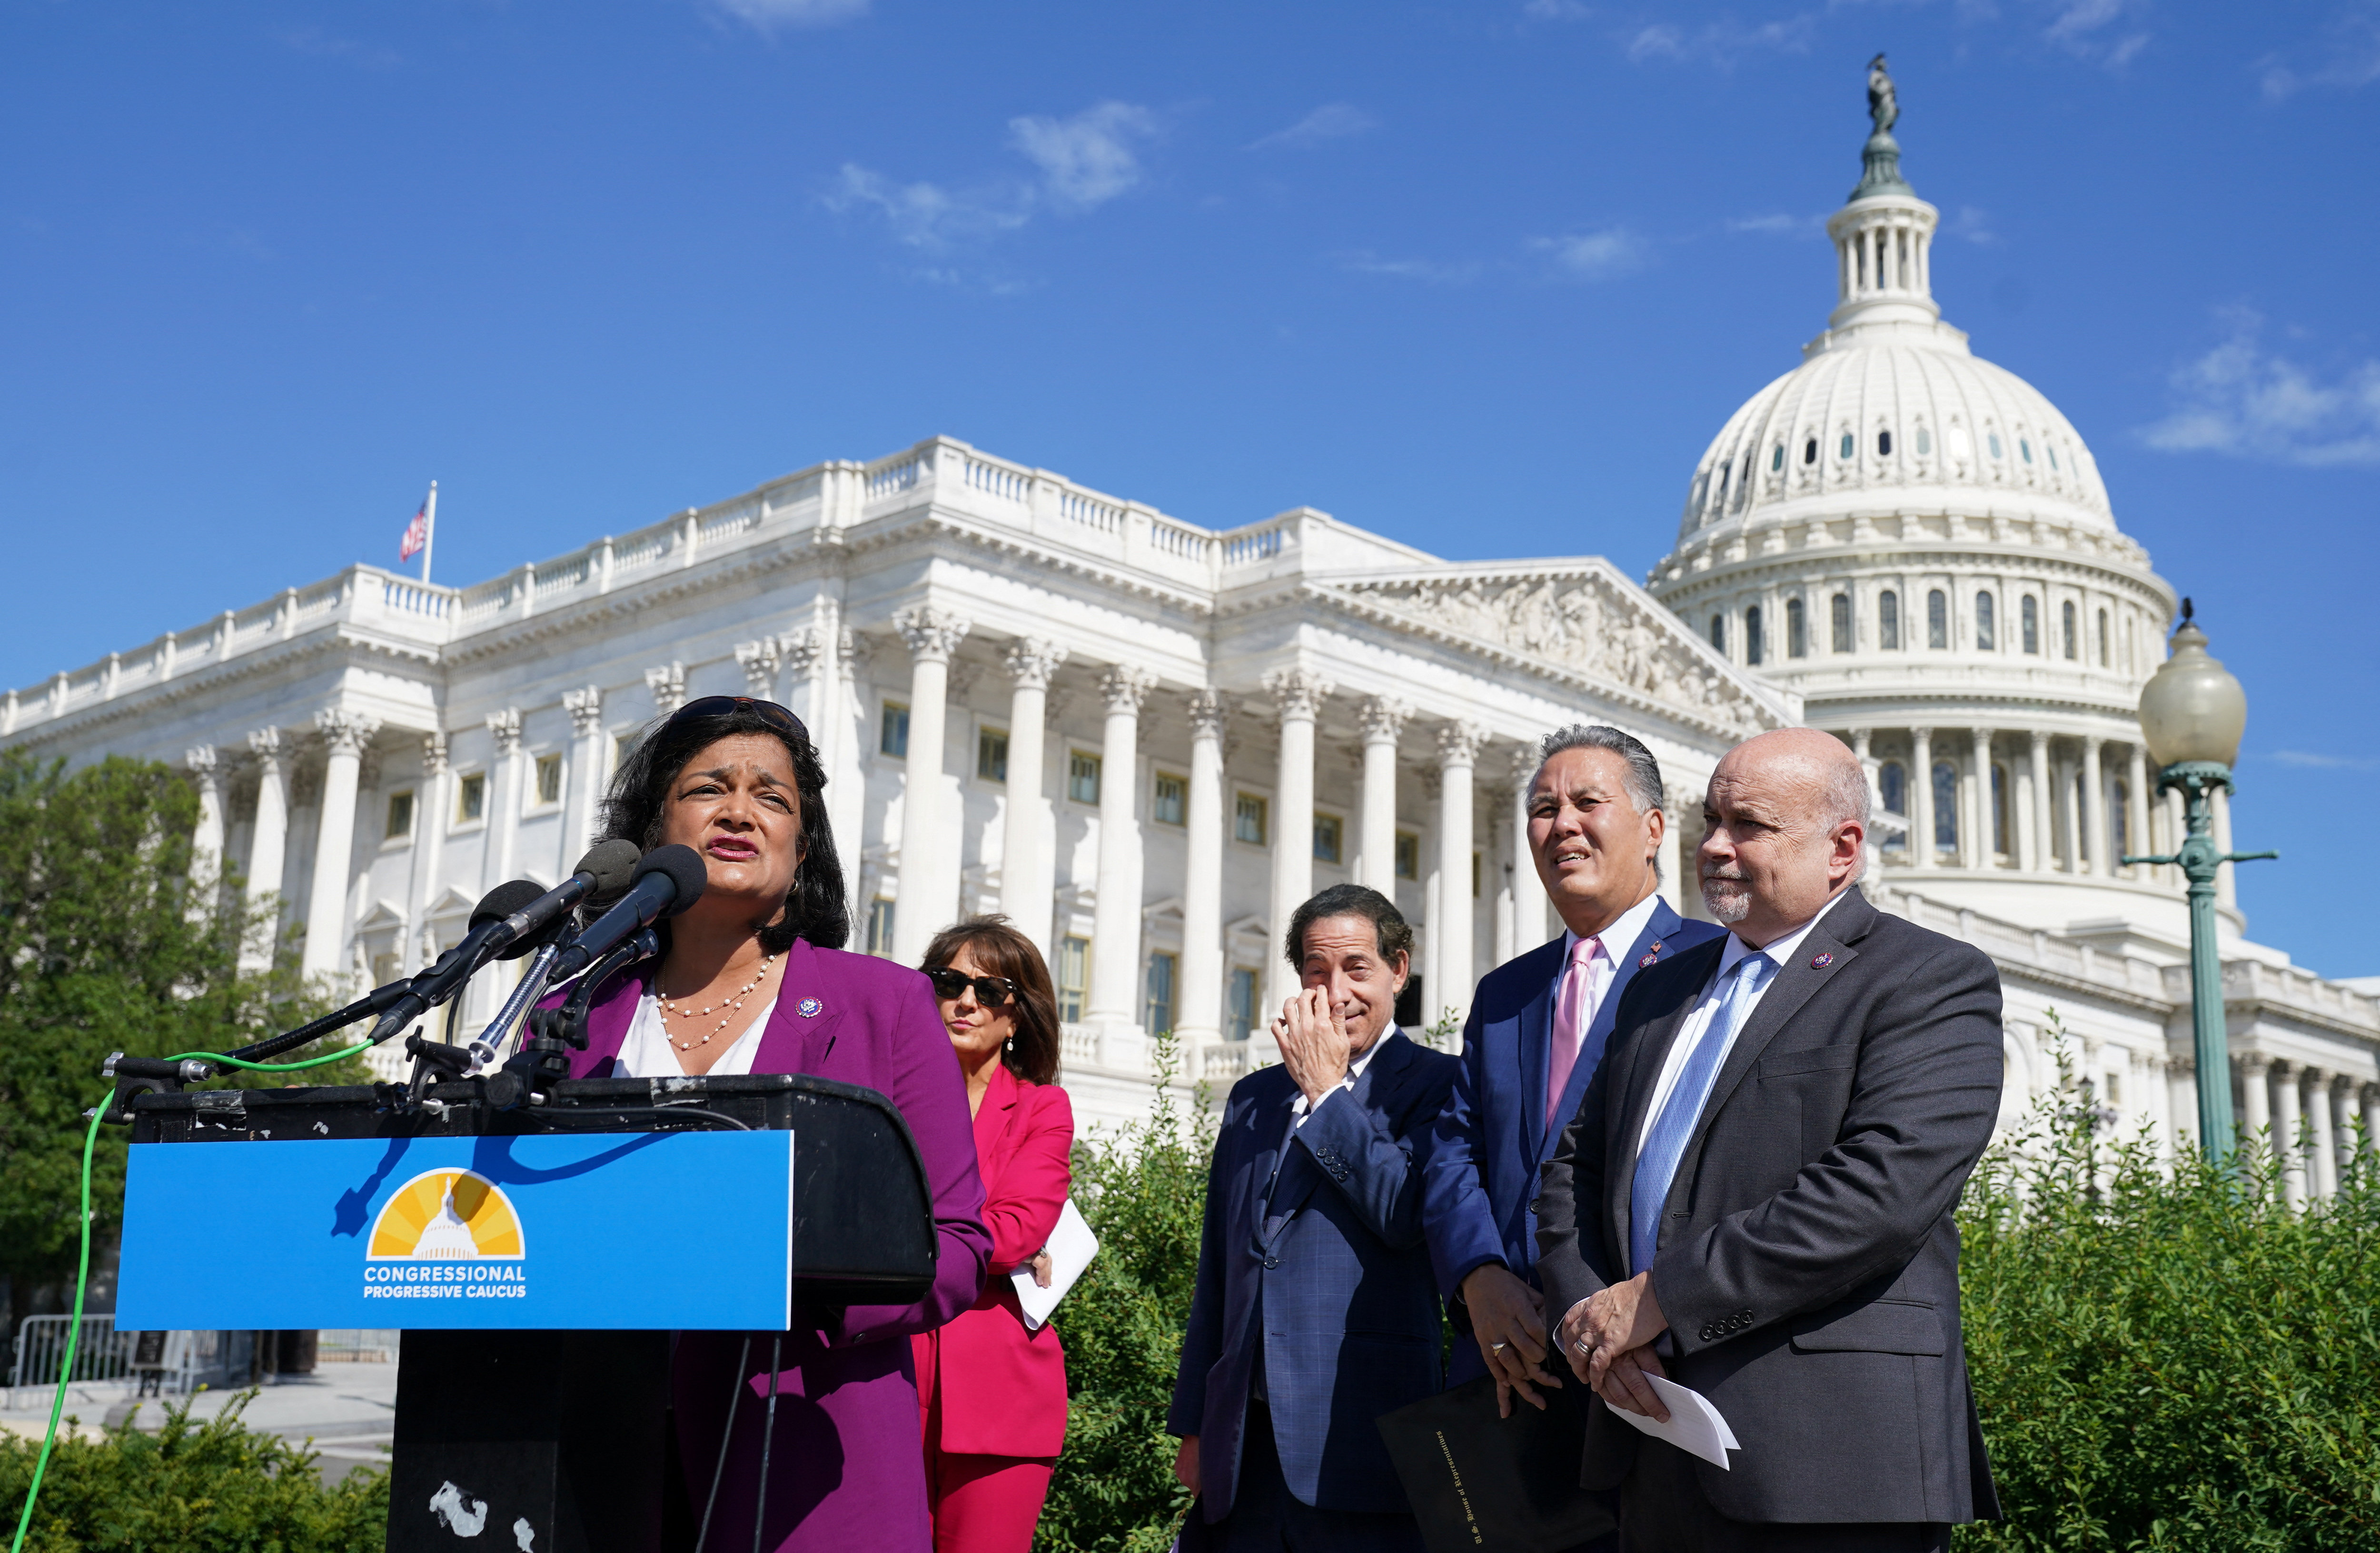 Congressional Progressive Caucus members hold a press conference at the U.S. Capitol in Washington